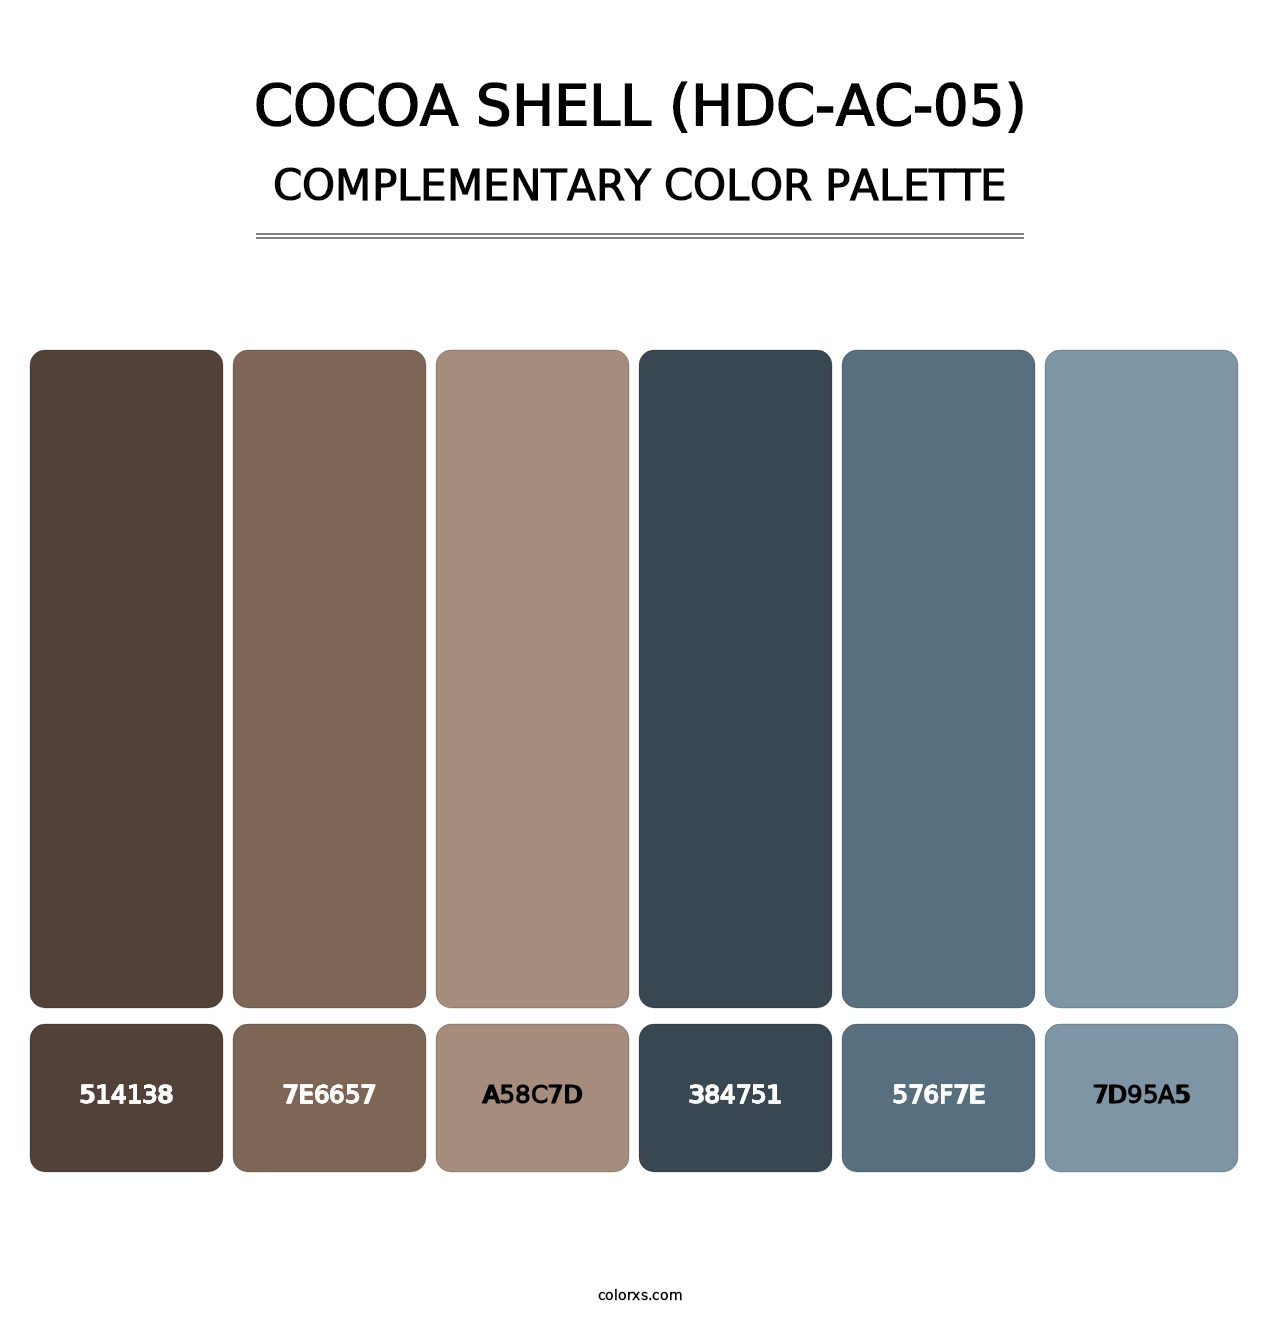 Cocoa Shell (HDC-AC-05) - Complementary Color Palette